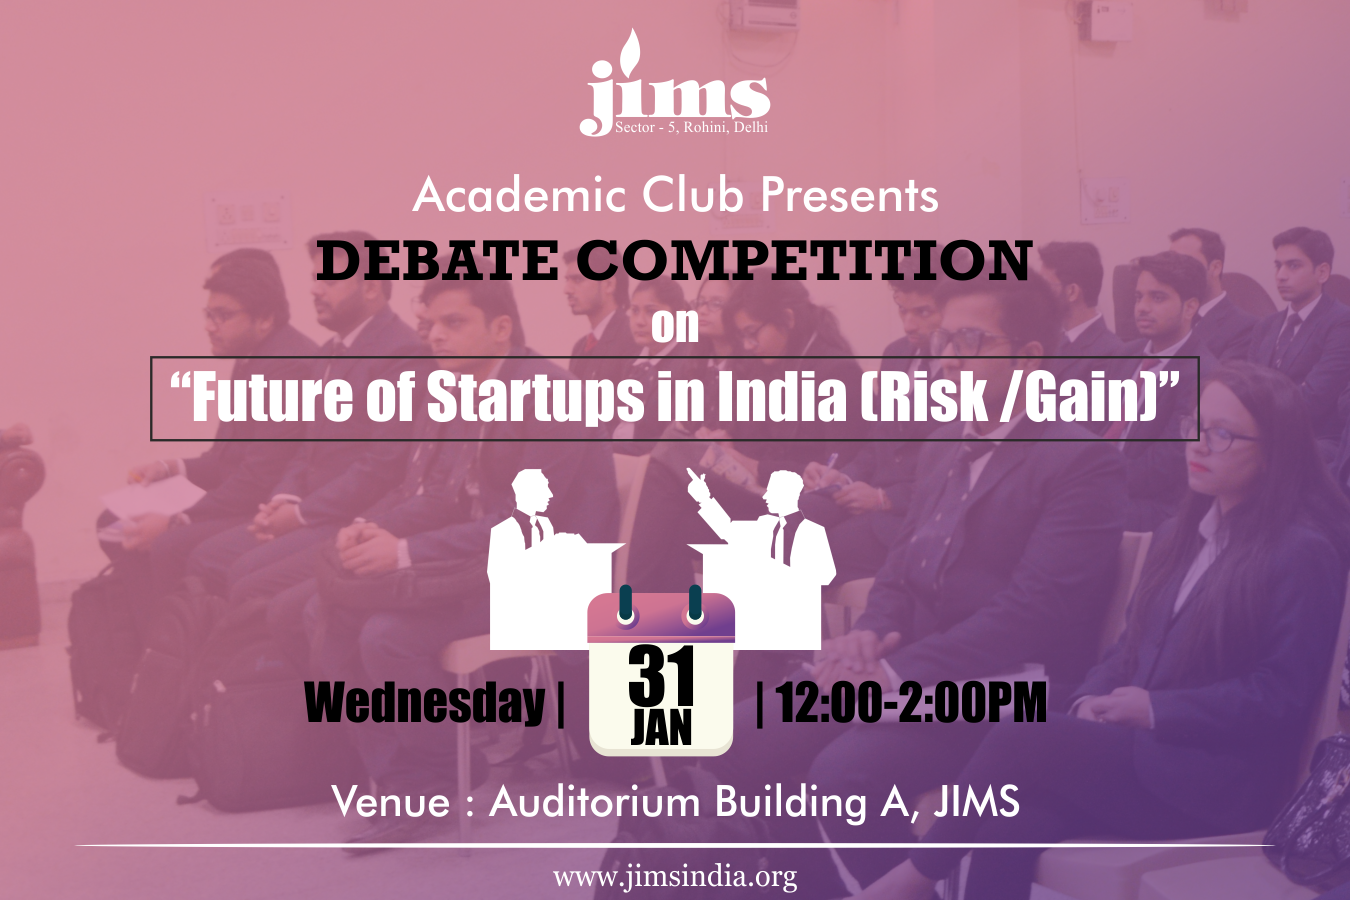 JIMS is organizing a Debate Competition on future of Startups in India